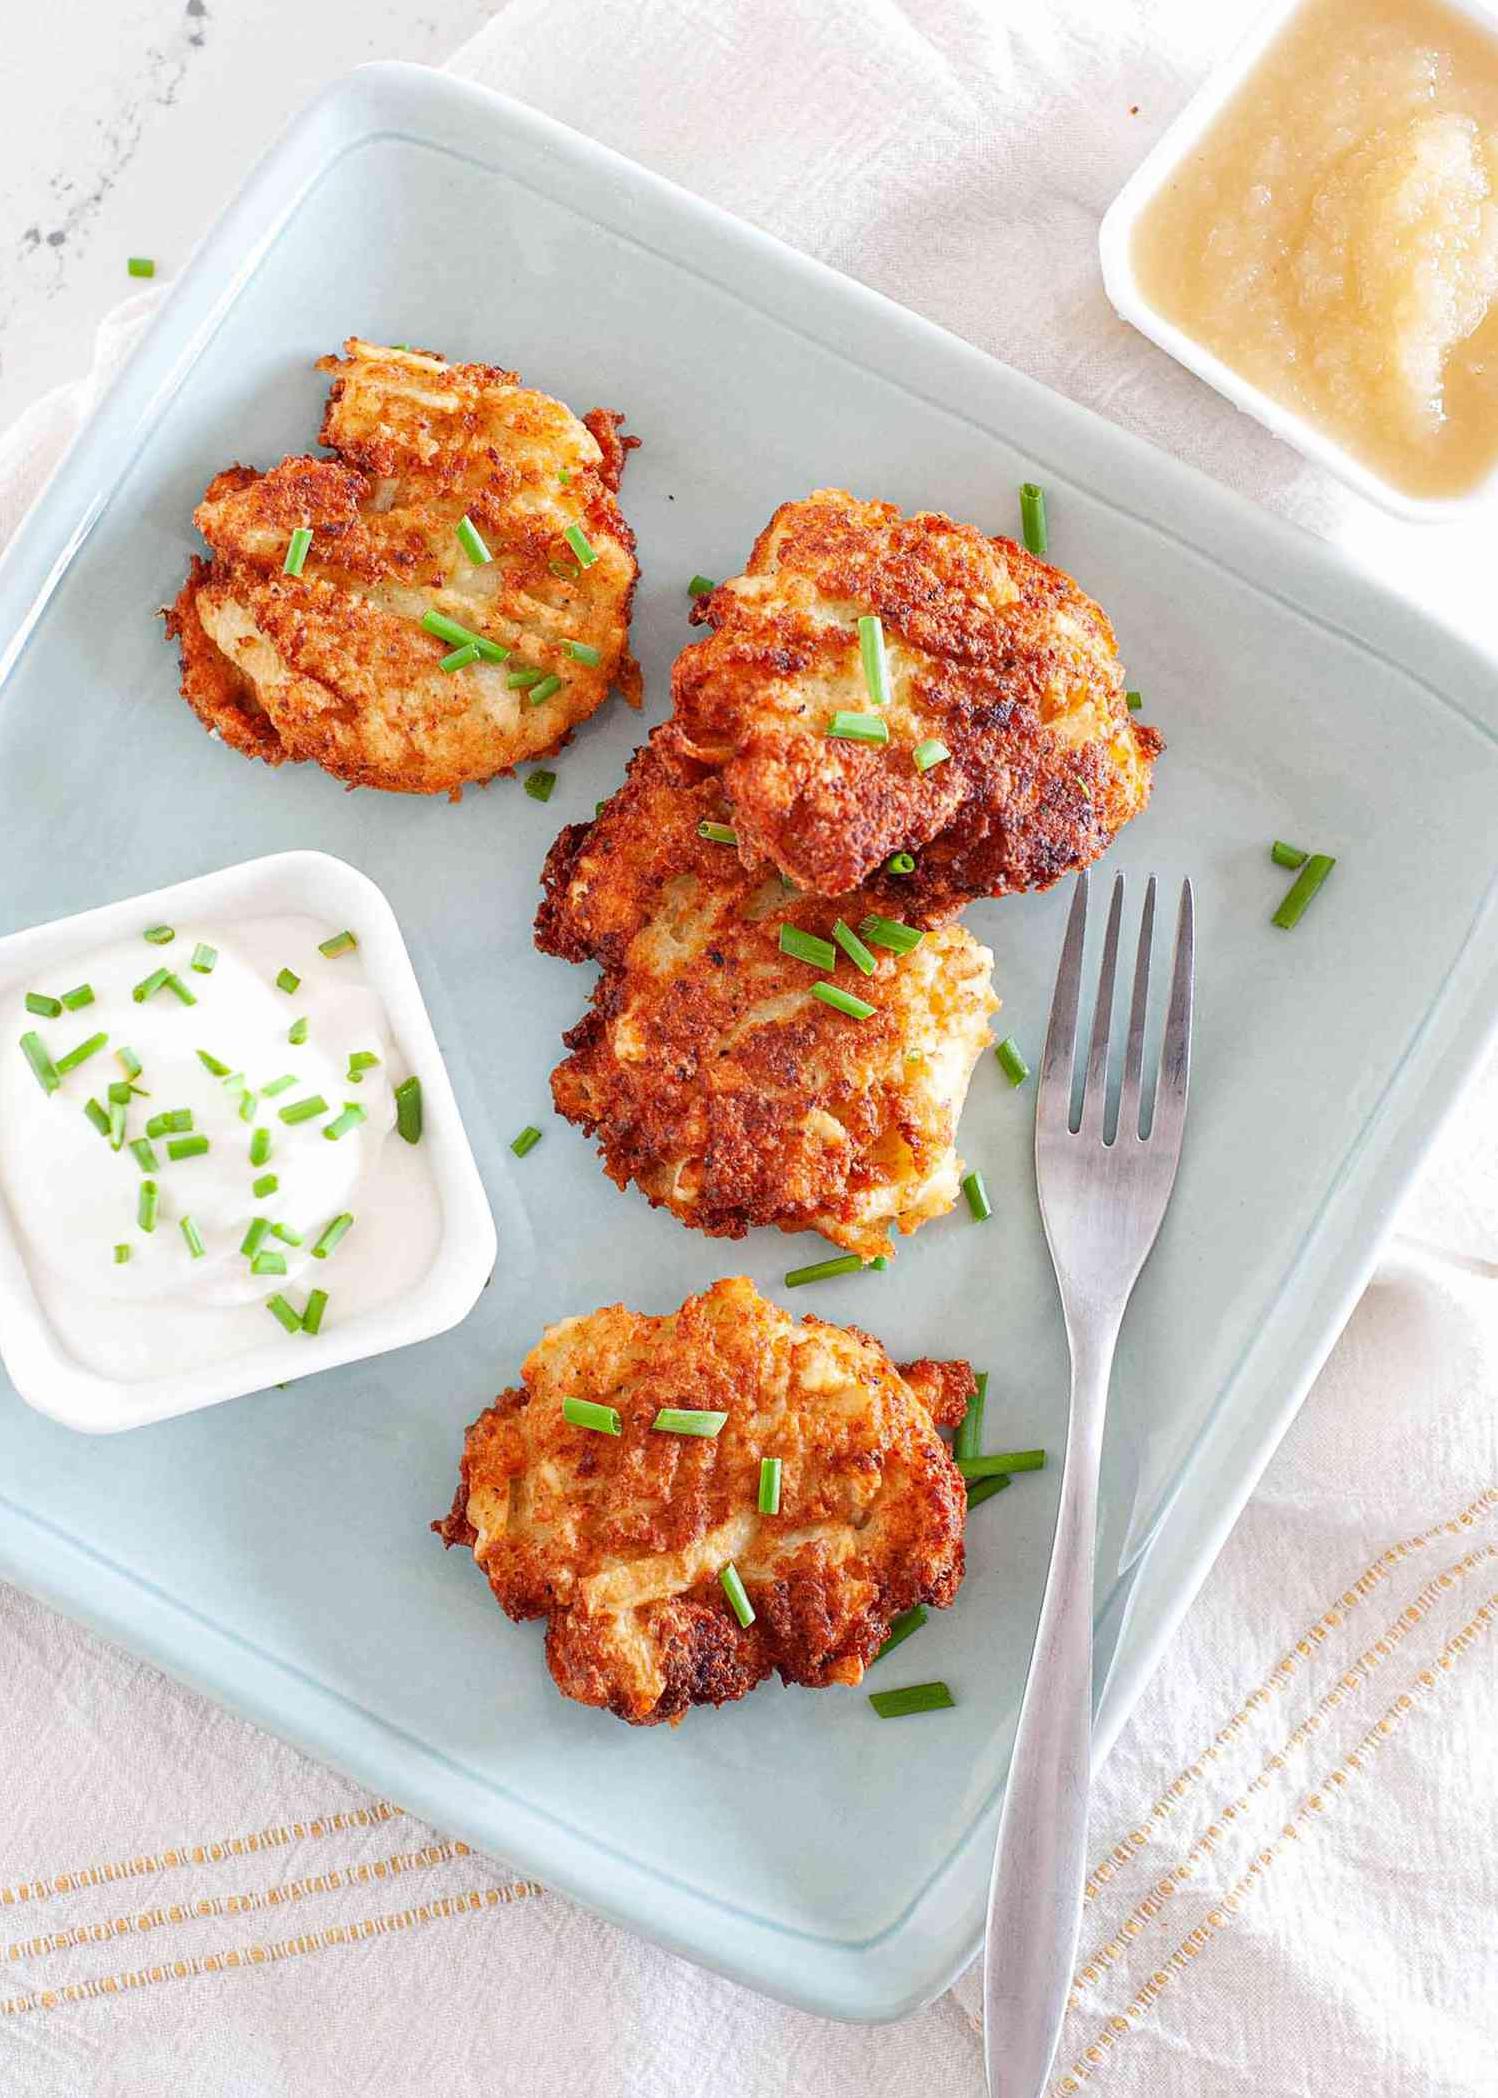  Don't forget the apple sauce! Our latkes are made to be paired with this classic condiment